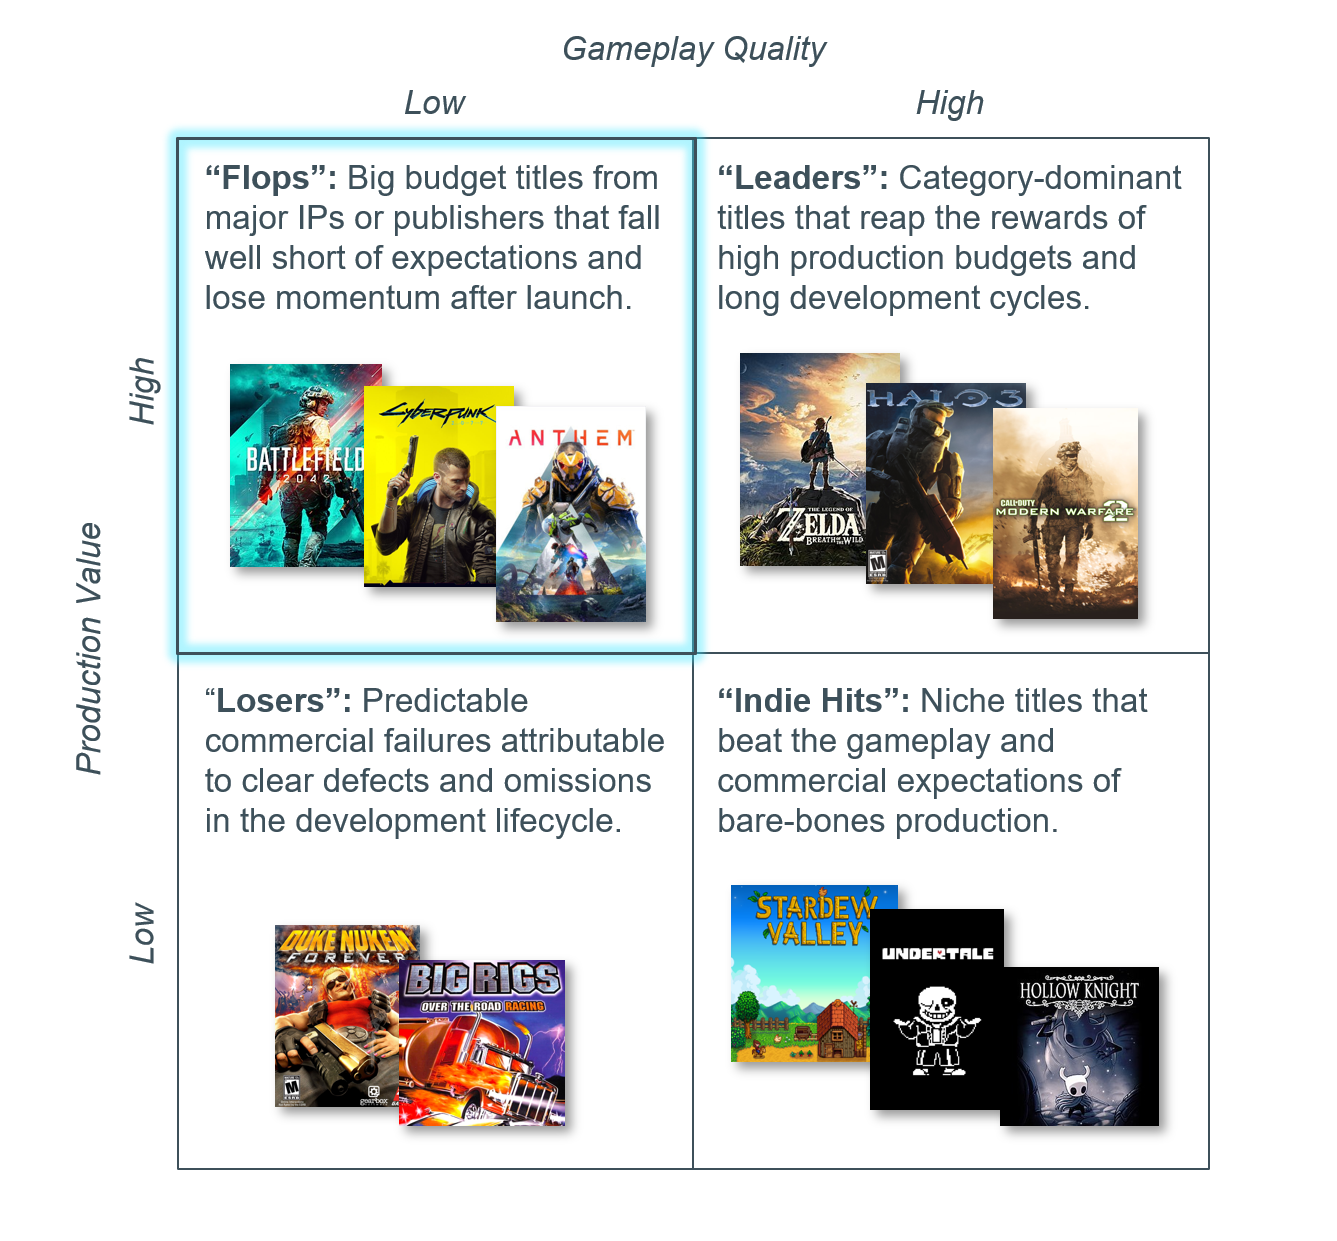 Segment Performance of Games in the Indie Genre